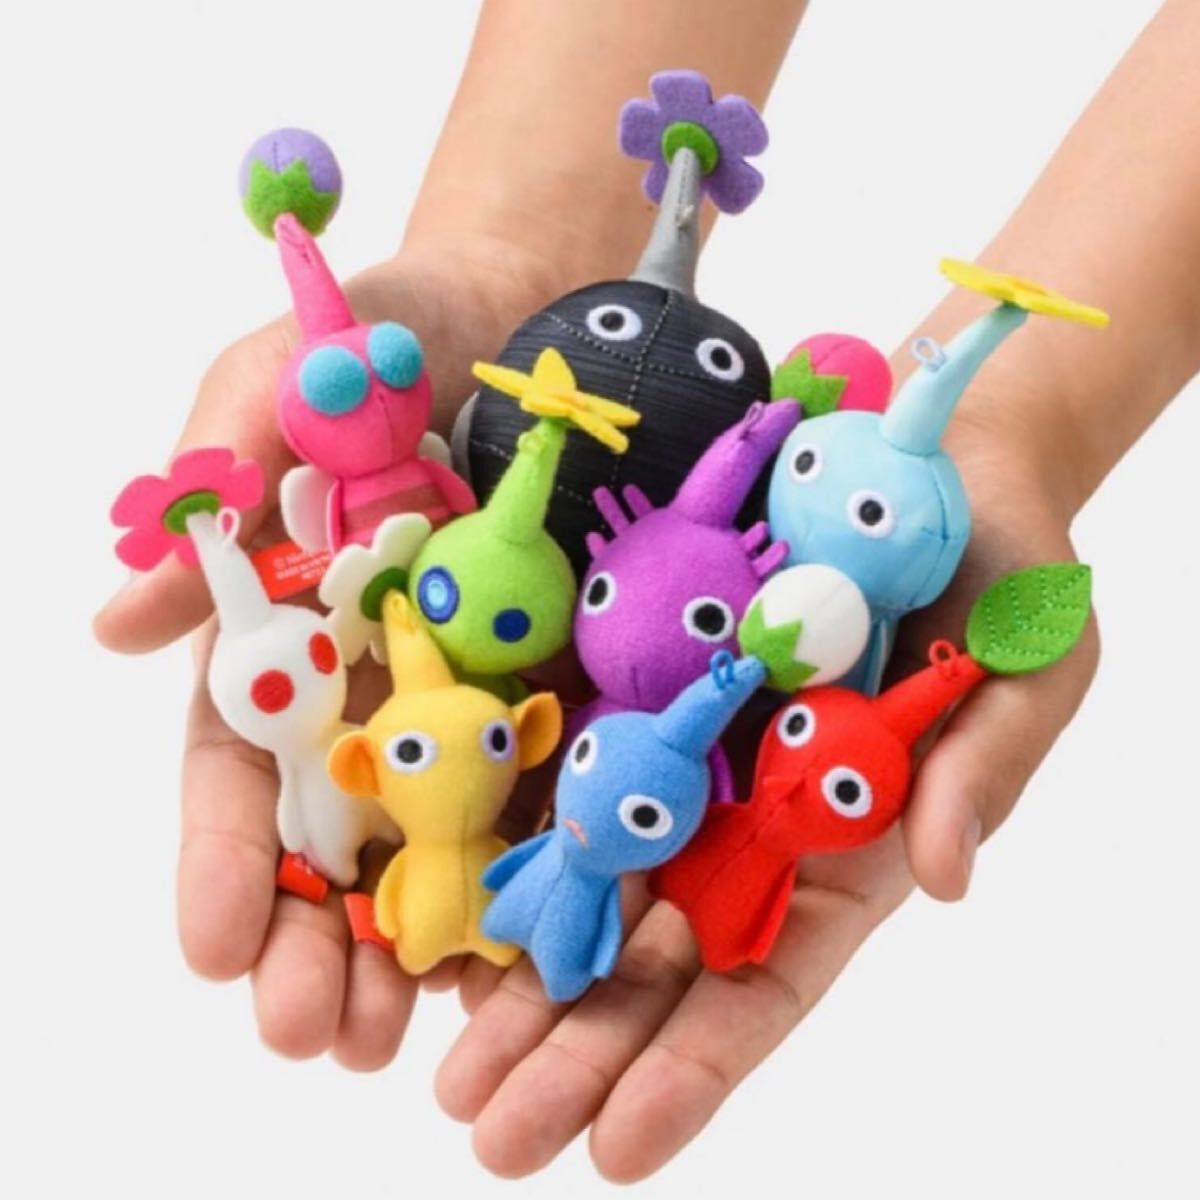 Pikmin Mascot Plush Keychain Complete Set of 9 Nintendo Japan New with tag F/S